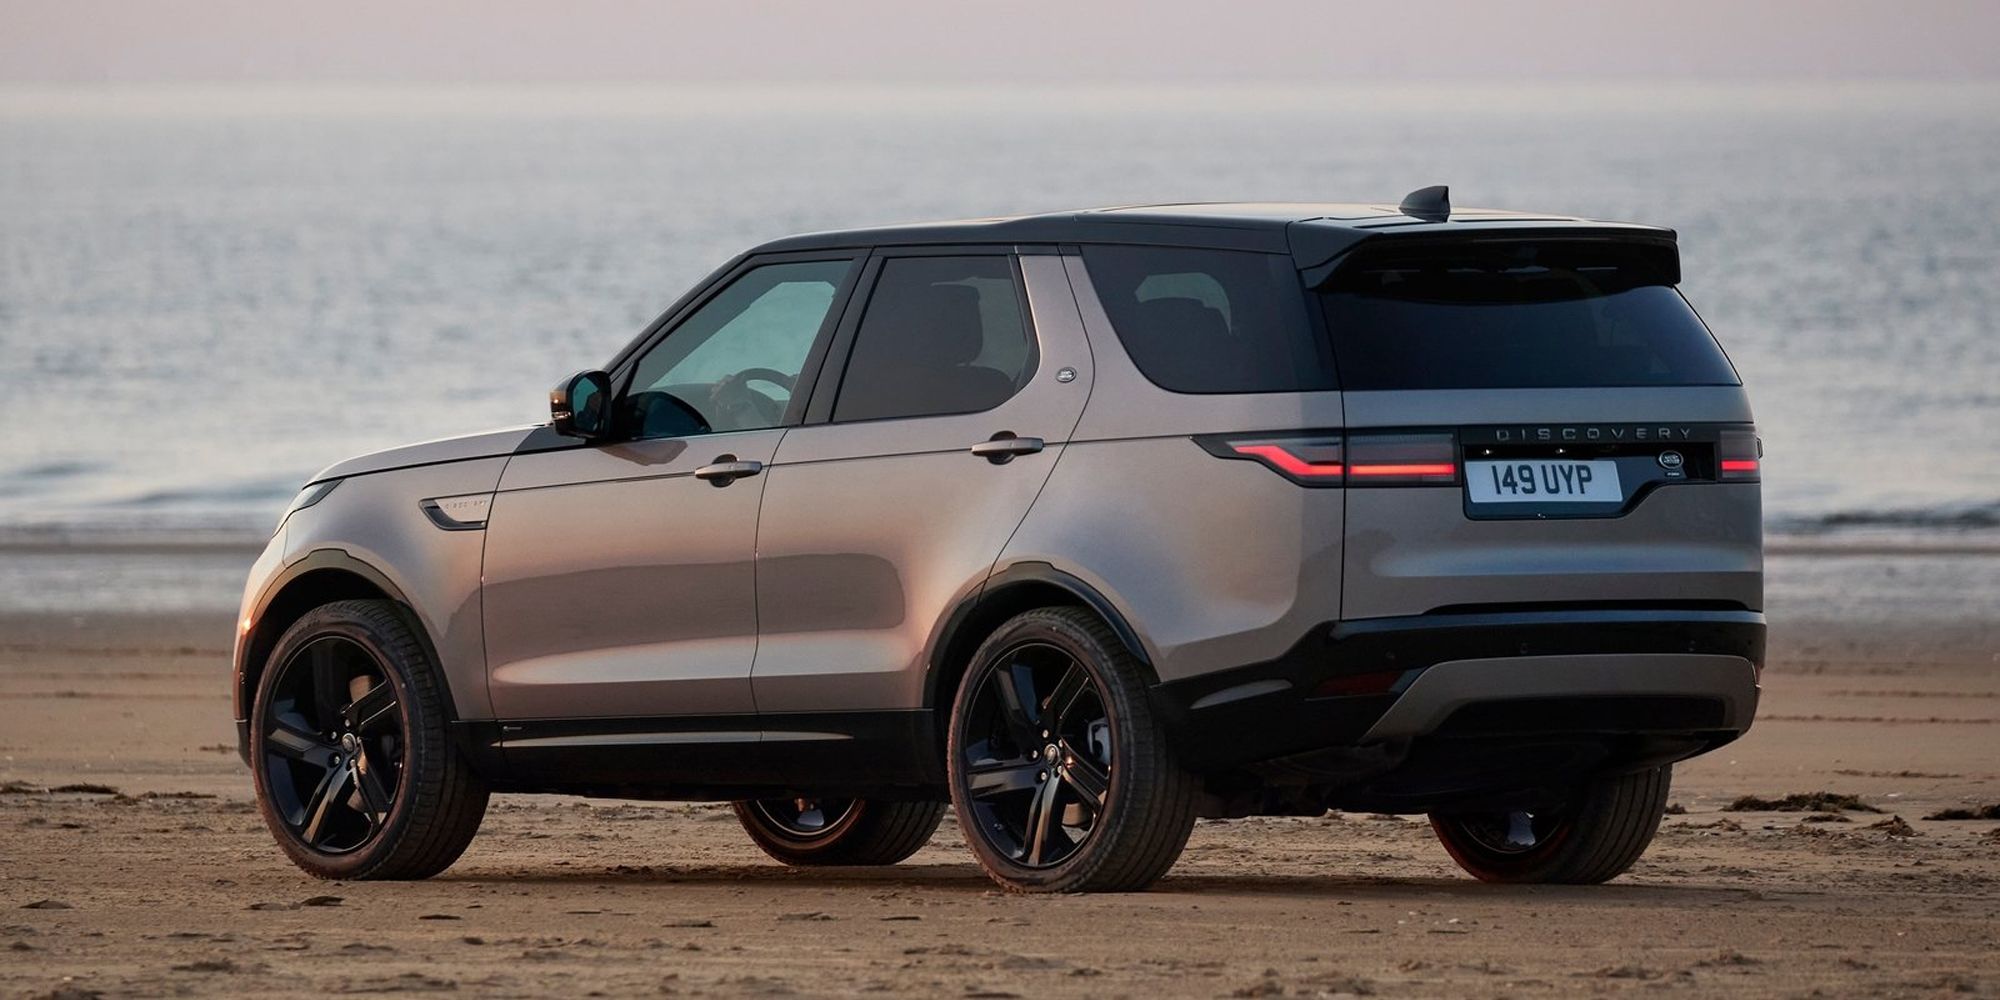 The rear of the facelifted Discovery